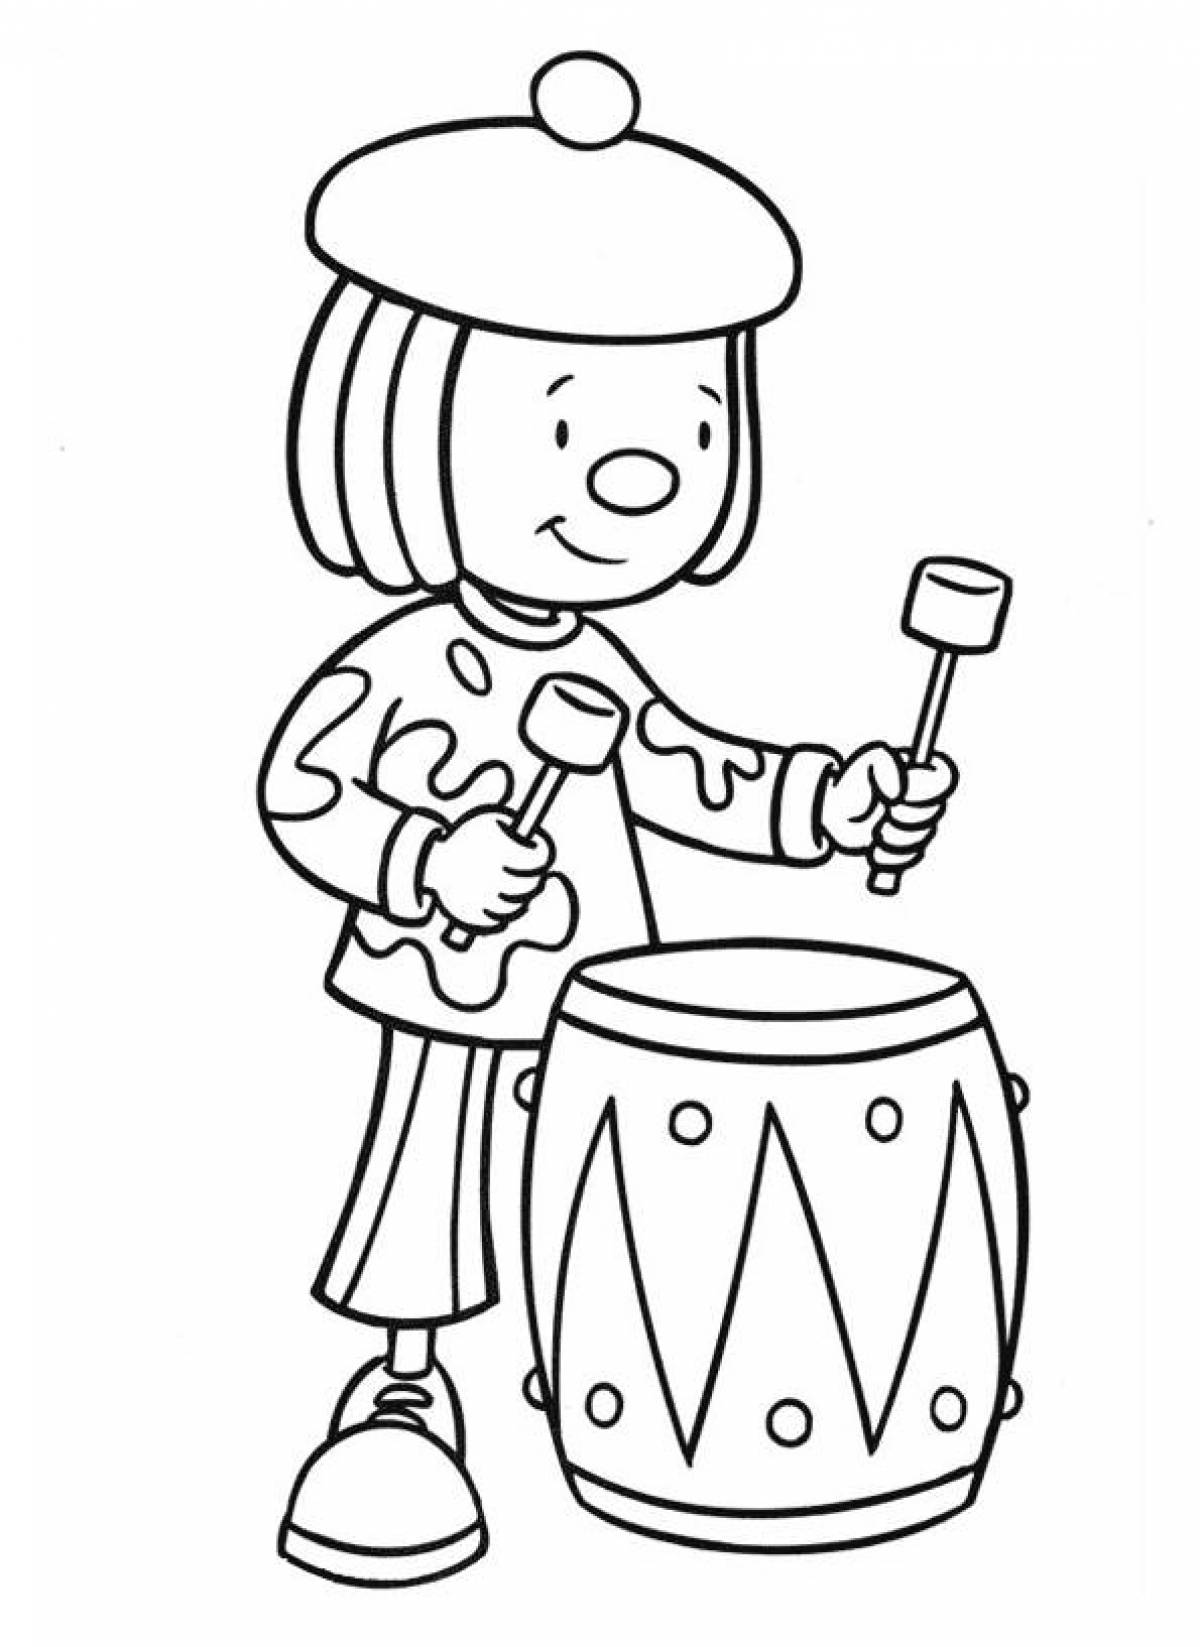 Boy with a drum